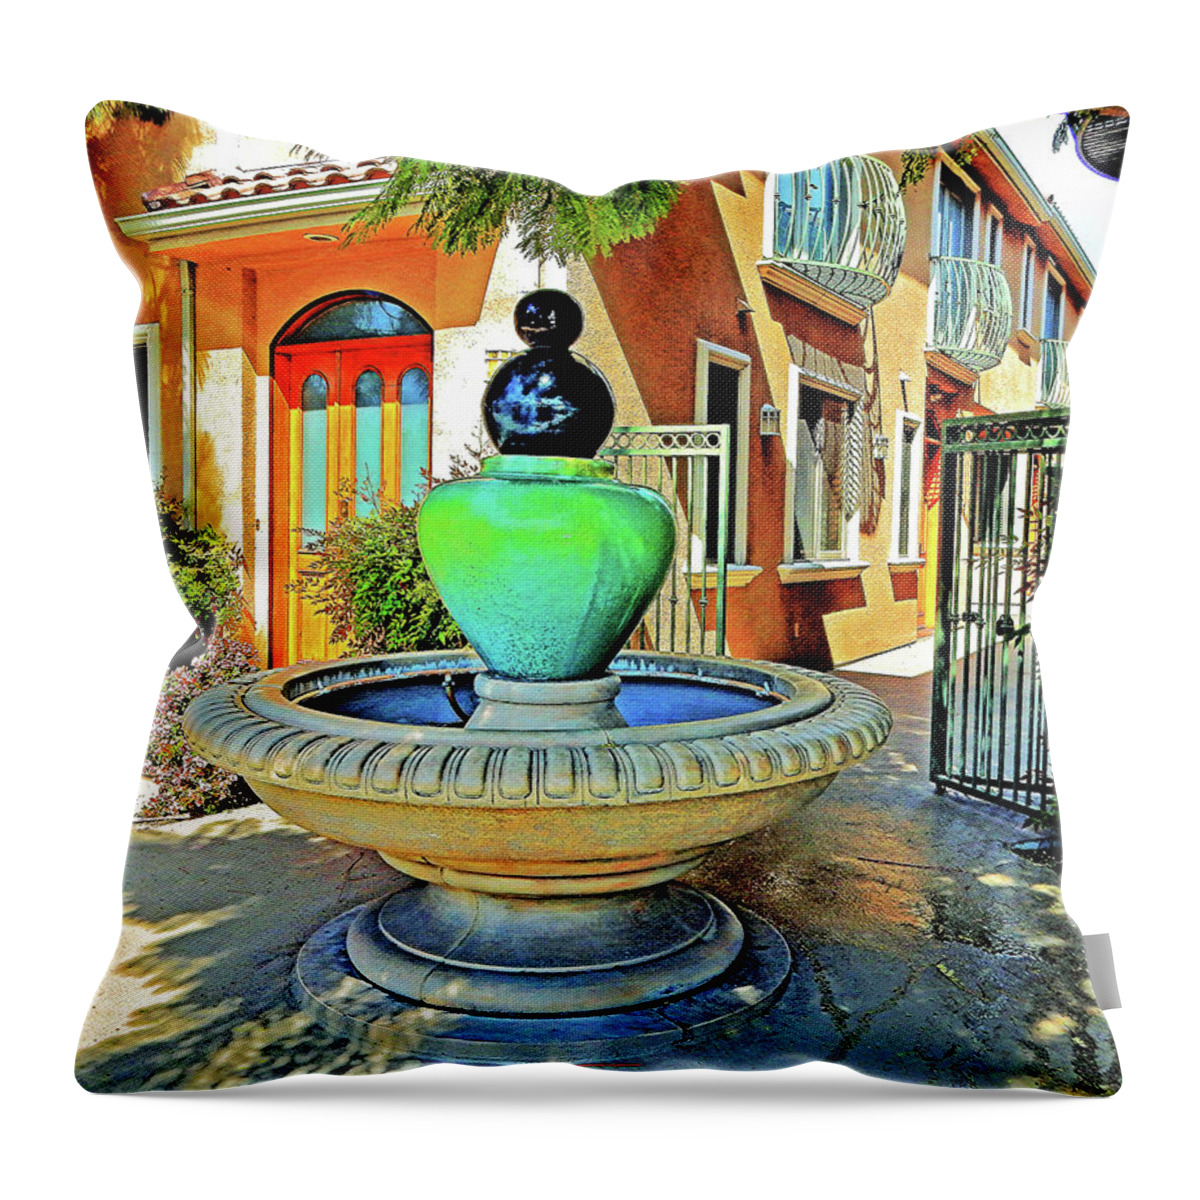 Fountain Throw Pillow featuring the photograph Buena Vista Fountain by Andrew Lawrence